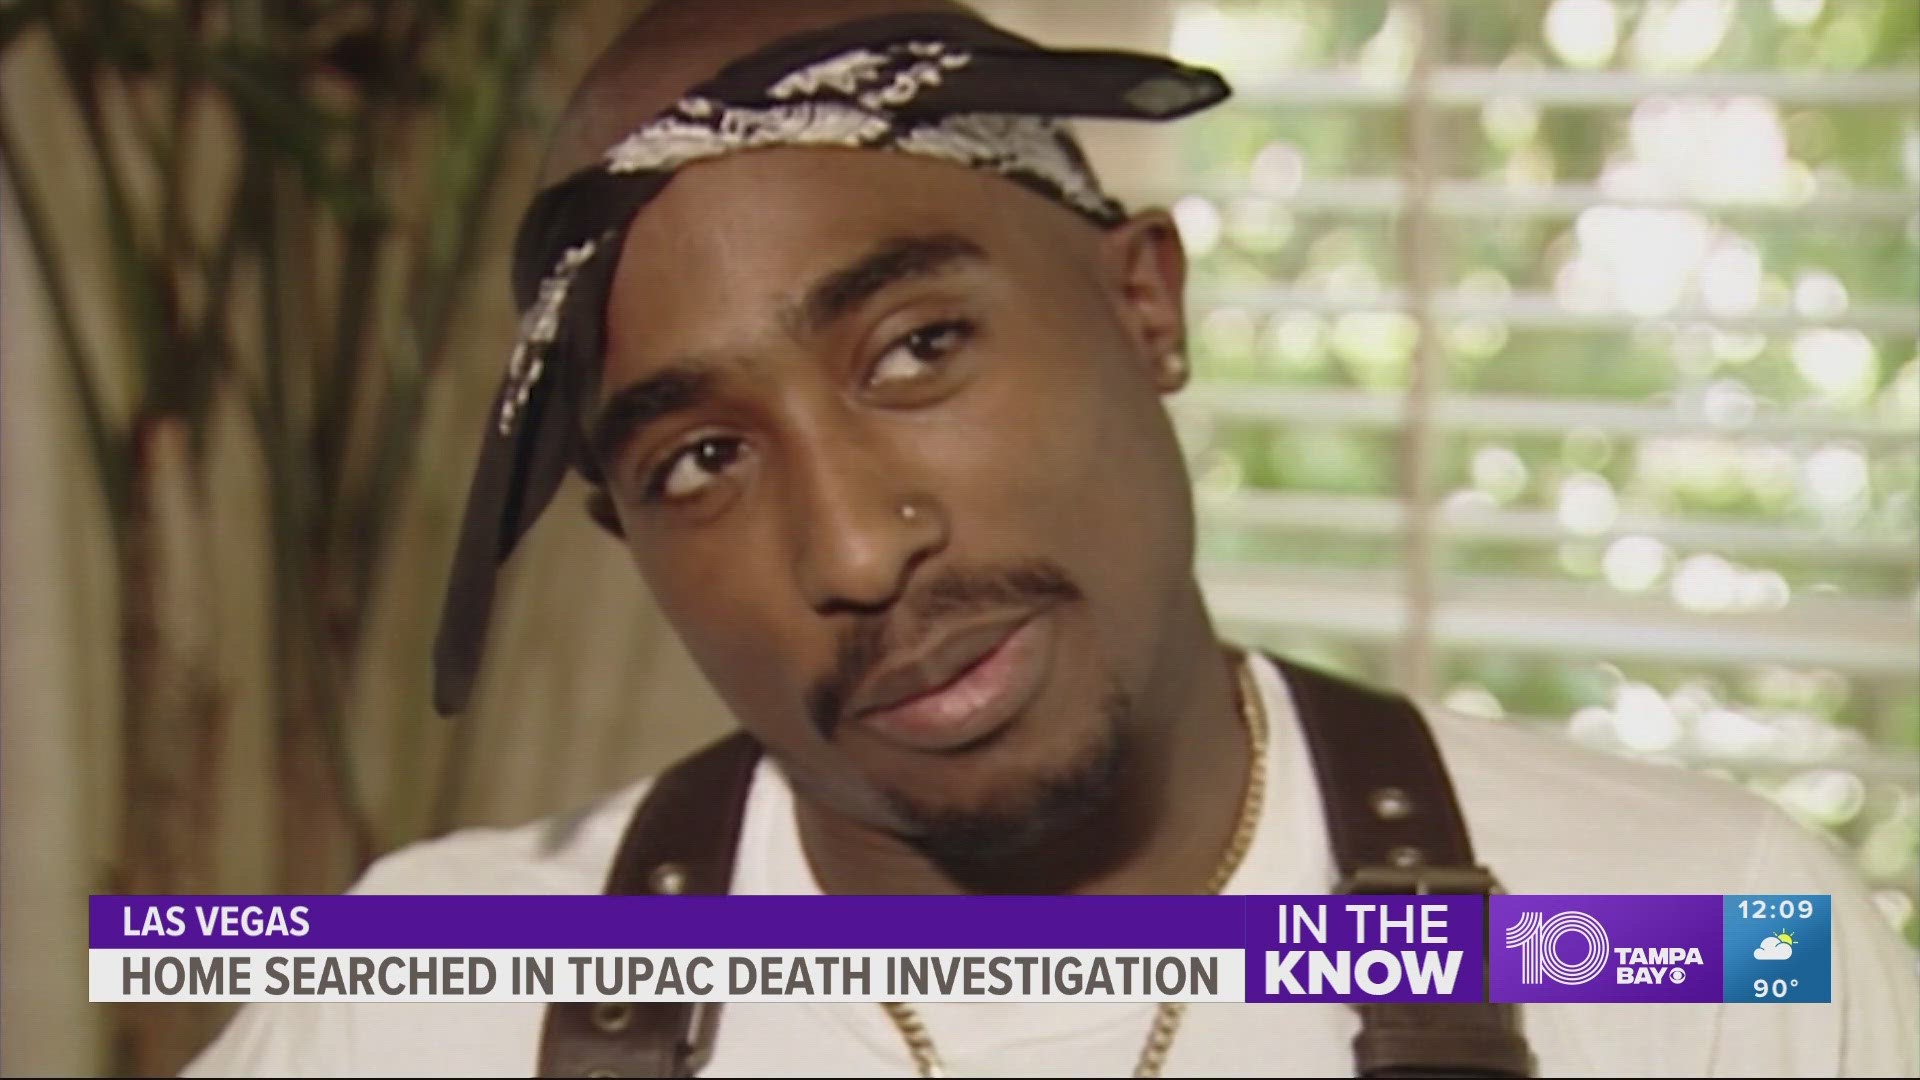 Police searched a house in the investigation of Tupac Shakur's murder. Sources reveal who the warrant involved.